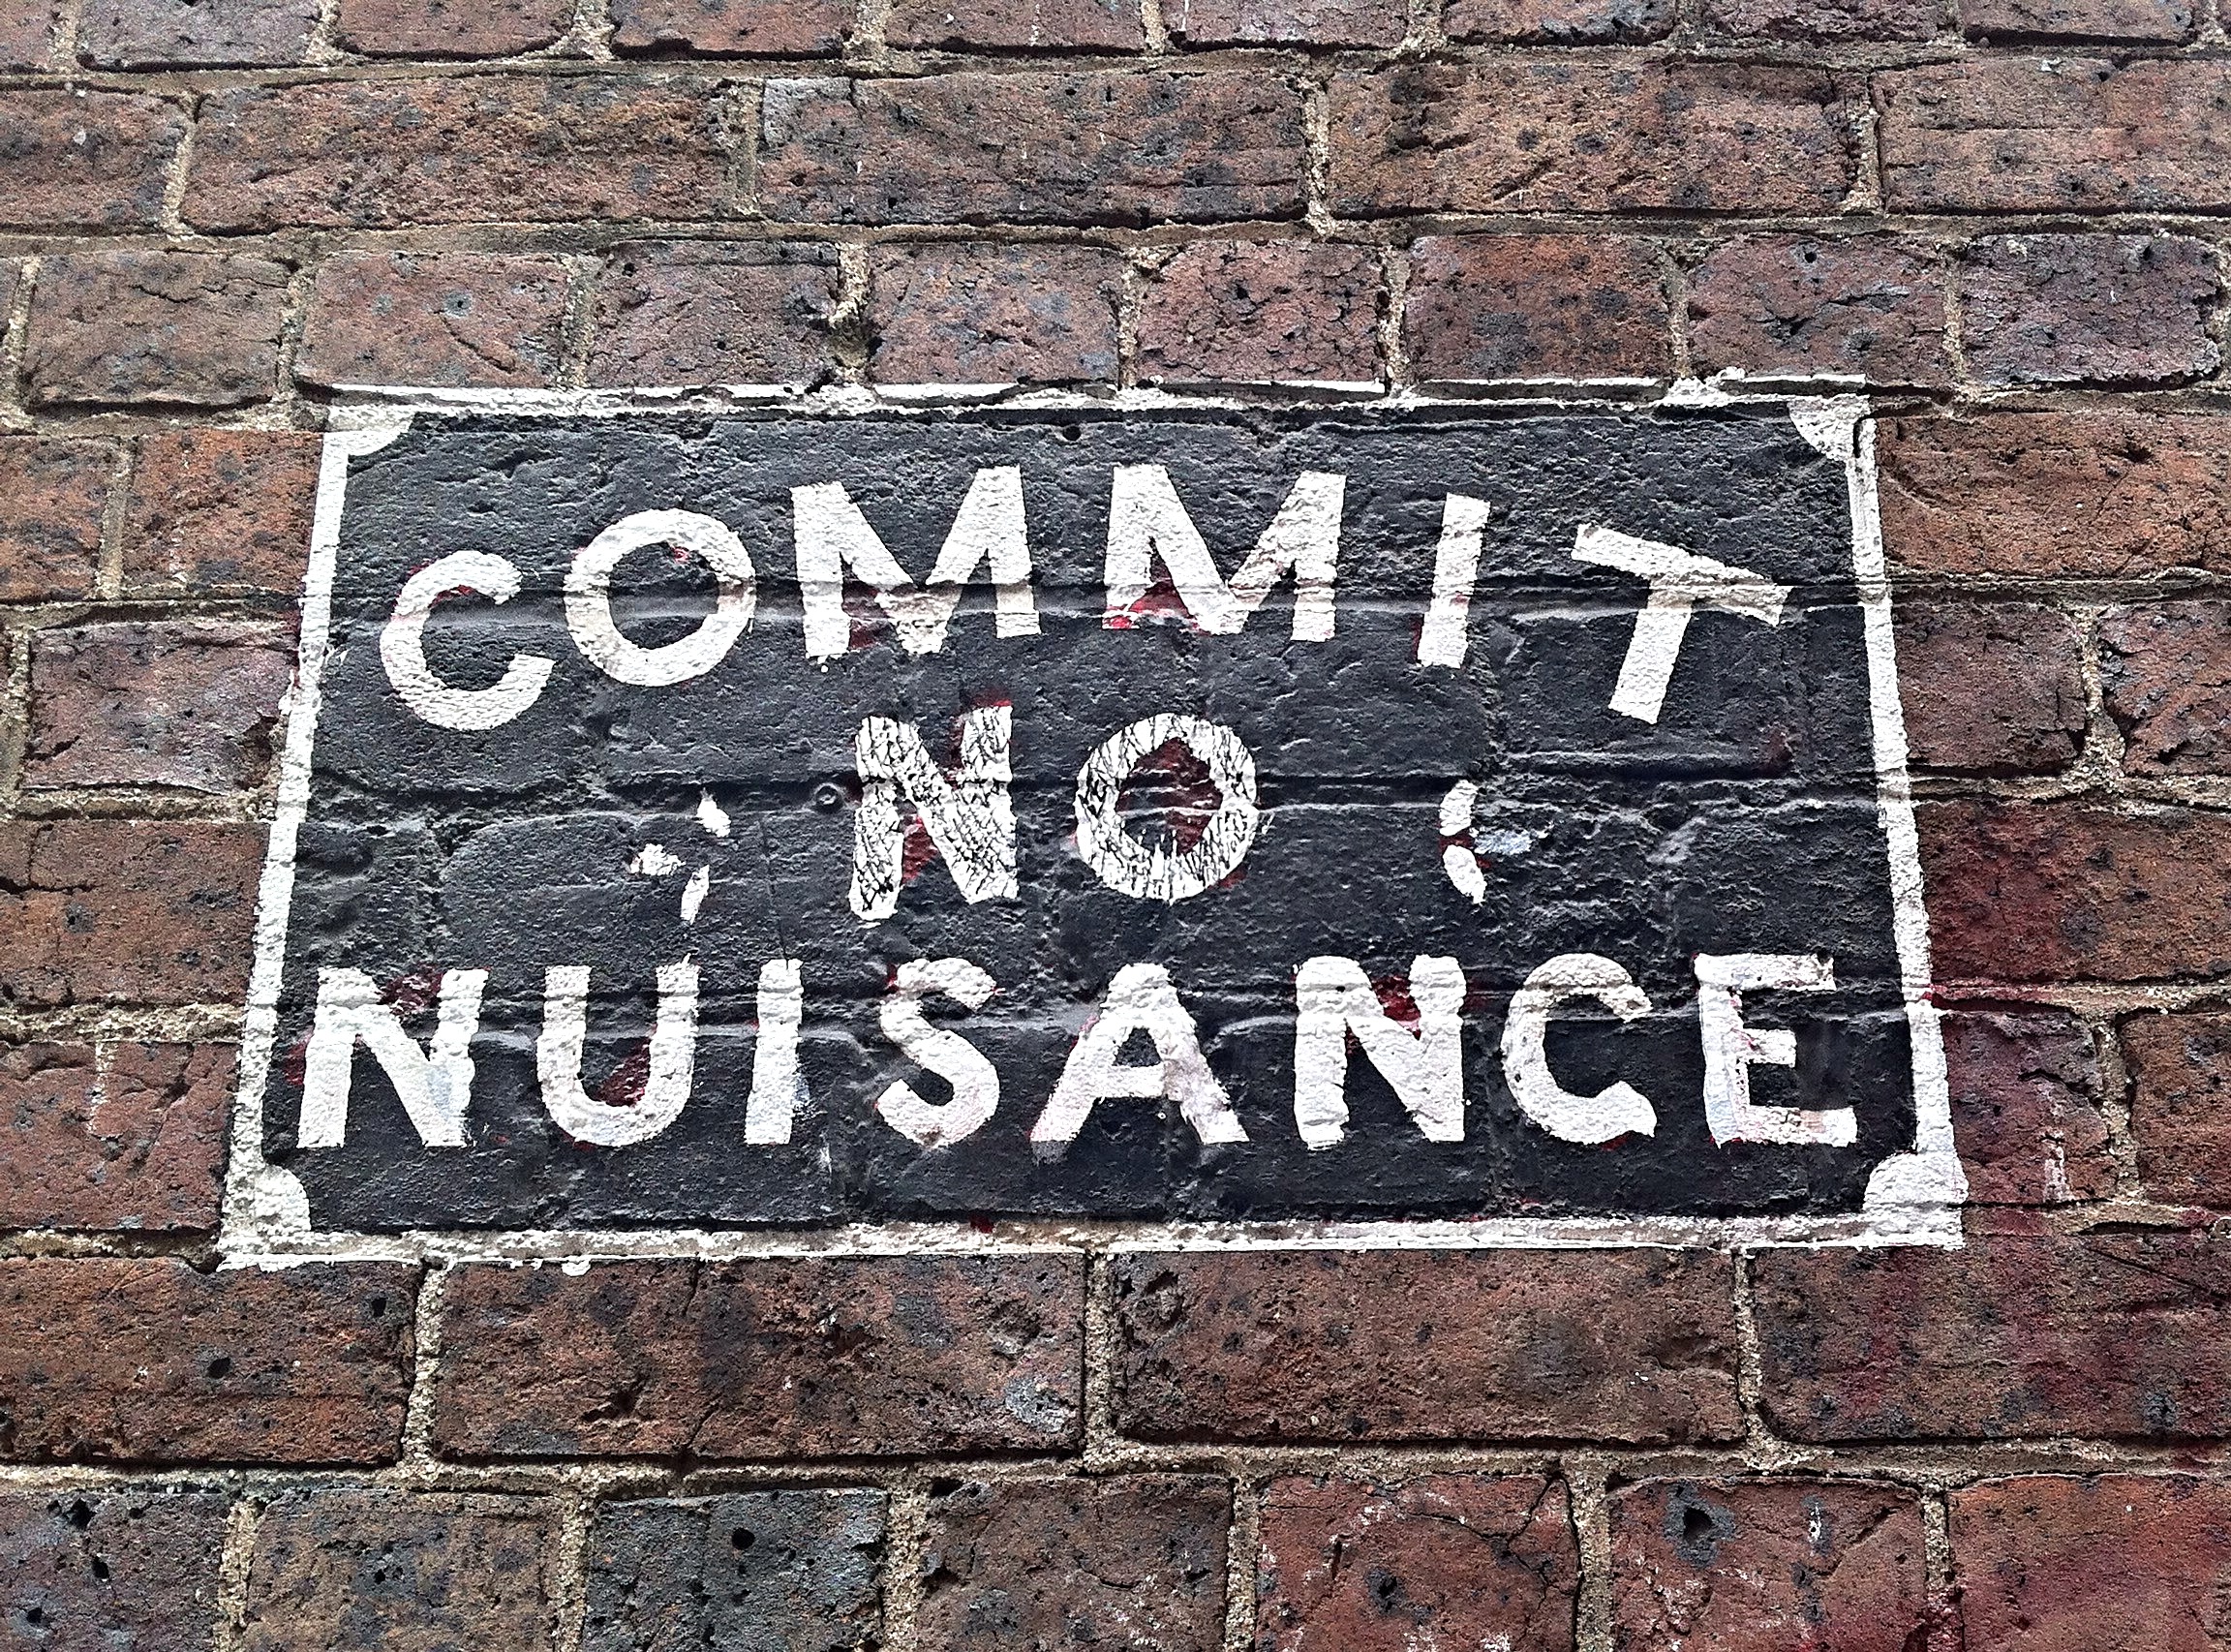 Sign on a brick wall that says "Commit No Nuisance."